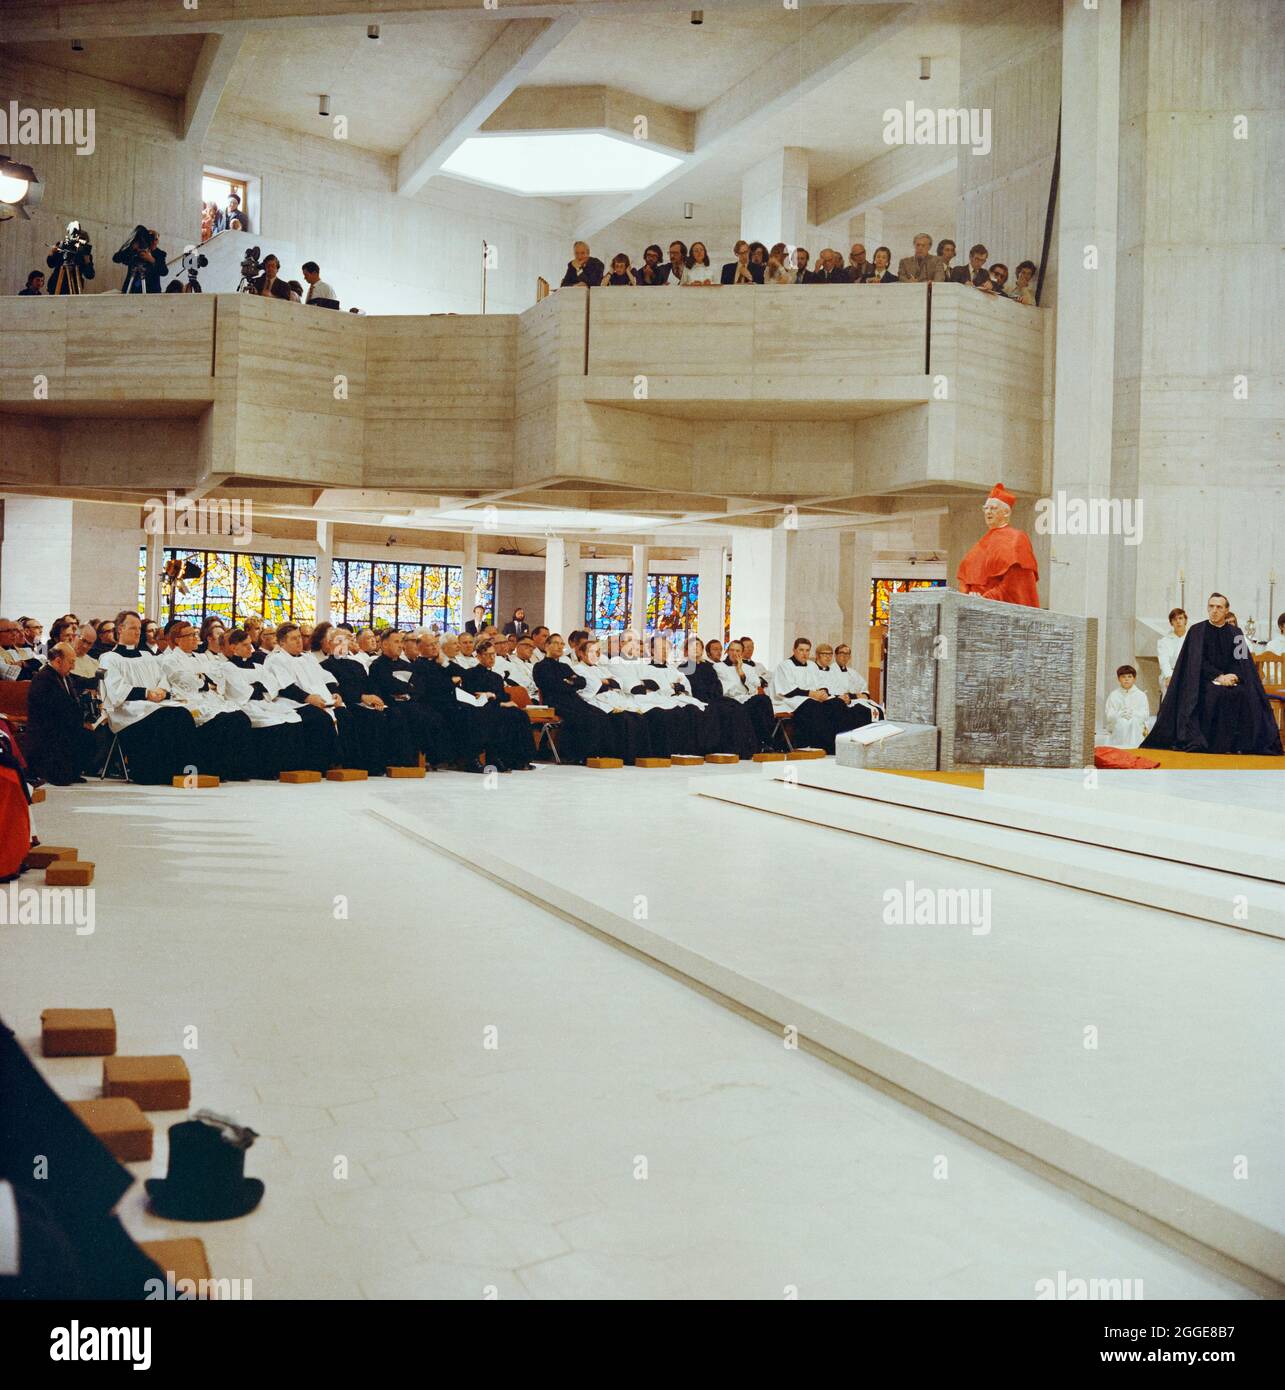 Cardinal John Heenan, Archbishop of Westminster, addressing the congregation in Clifton Cathedral during the consecration ceremony. This Roman Catholic Cathedral was designed by Ronald Weeks, E S Jennett and Antoni Poremba of the Percy Thomas Partnership. It was built by John Laing &amp; Son Limited between 1969-1973 and was constructed using pre-cast concrete panels and in-situ concrete. In 1974 it received the Concrete Award from the Concrete Society. Stock Photo